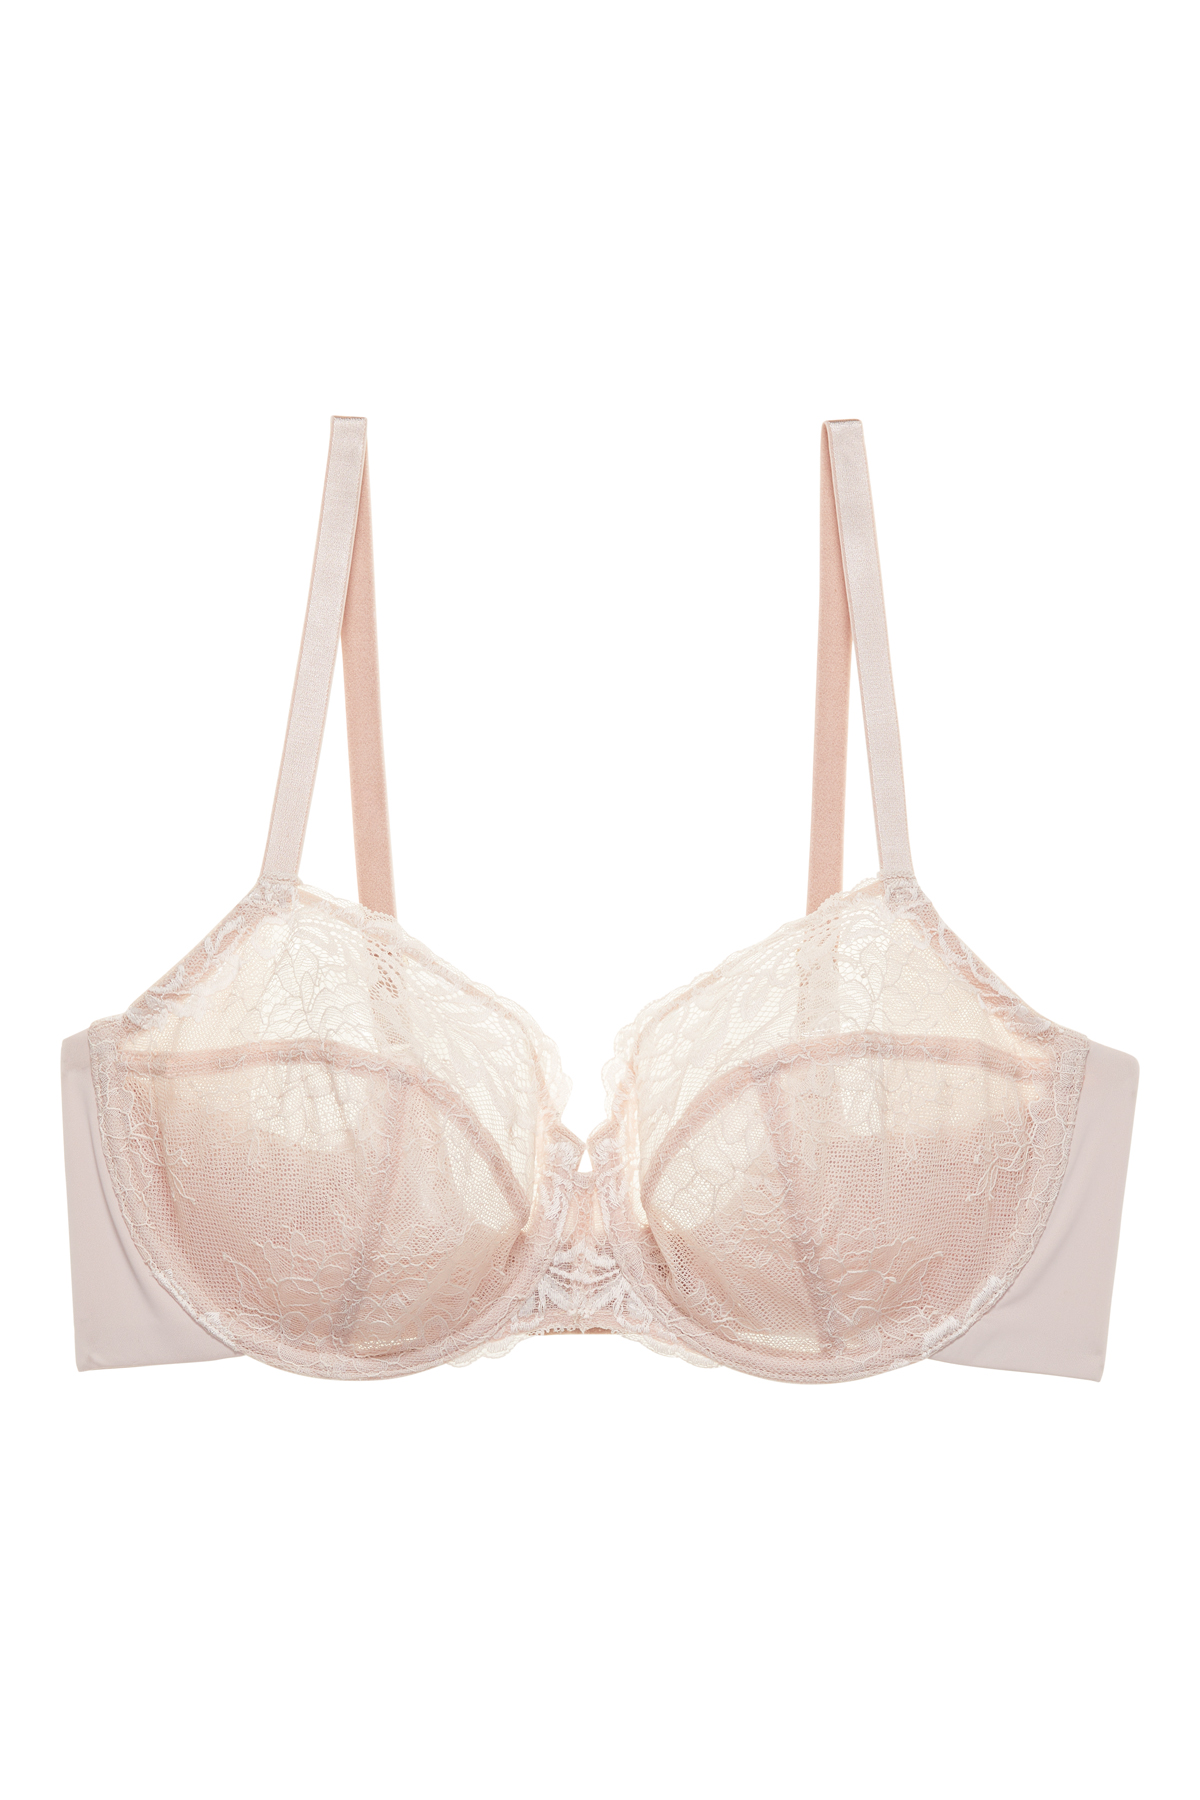 Bras N Things: Enjoy the finer details these with these NEW BRA, LINGERIE &  SLEEP ARRIVALS 🙌